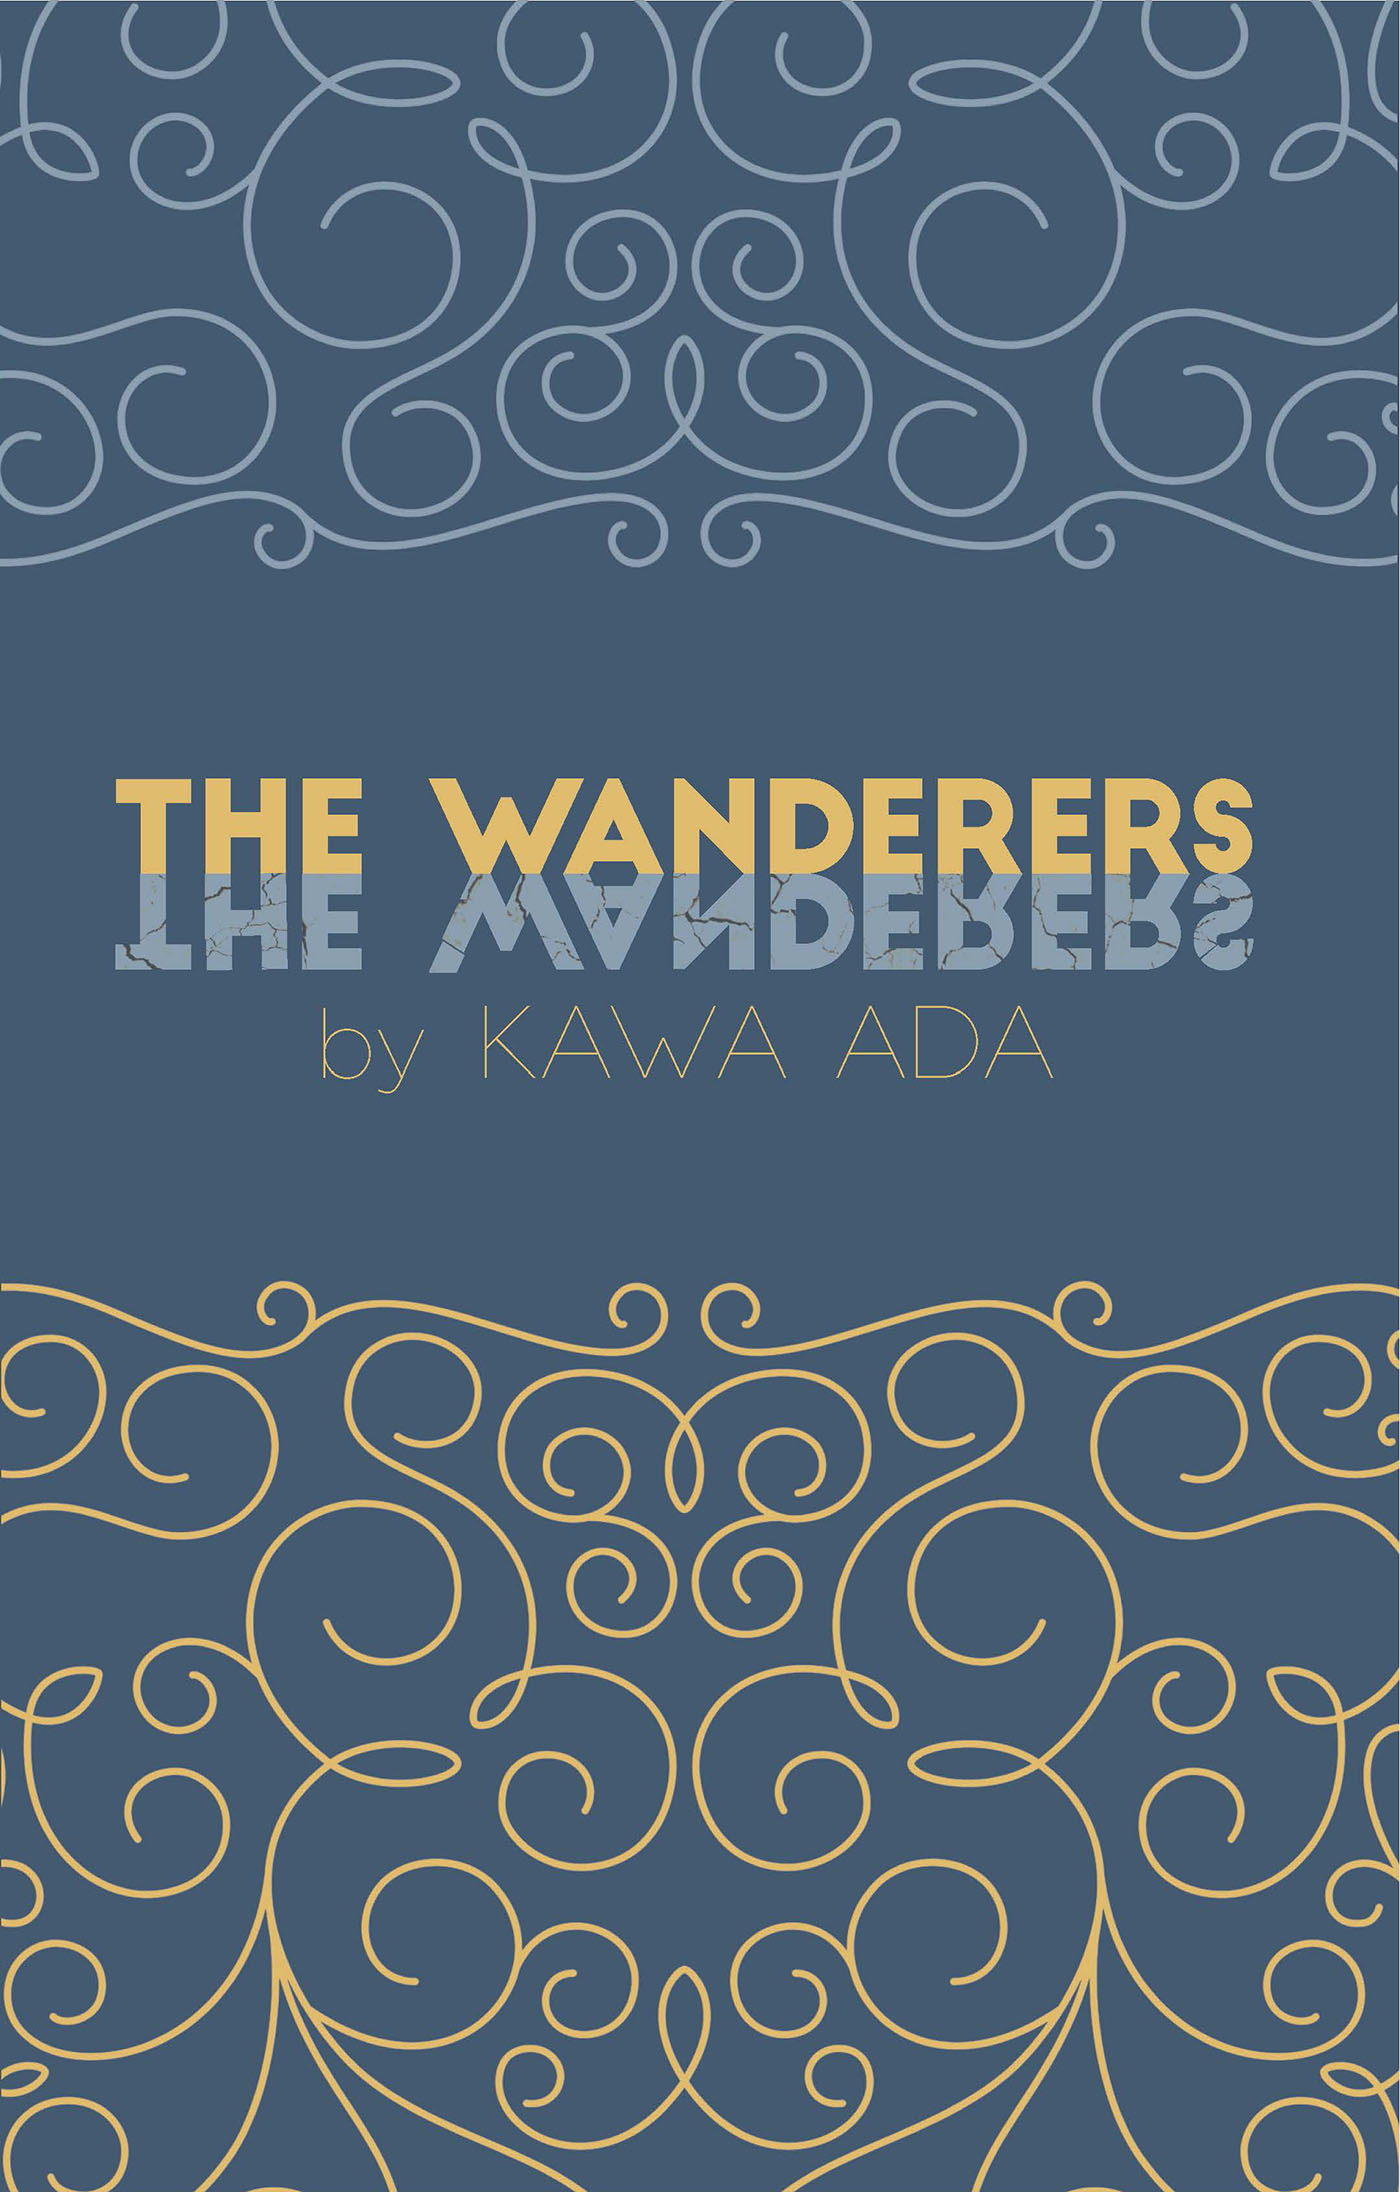 The Wanderers 2016 by Kawa Ada Excerpt by Tennessee Williams from The Night of - photo 1